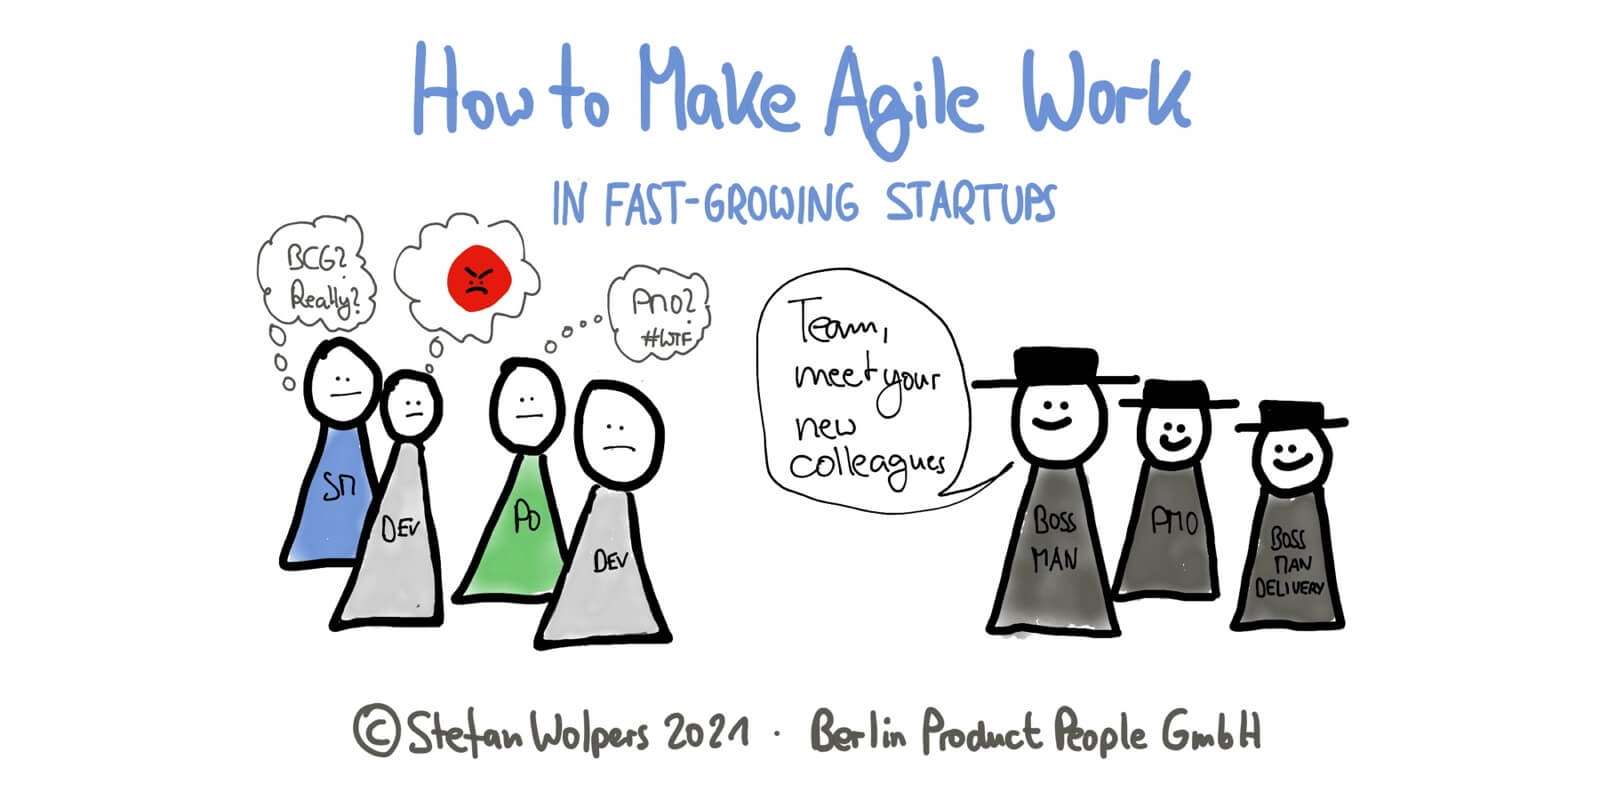 How to Make Agile Work in Fast-Growing Startups